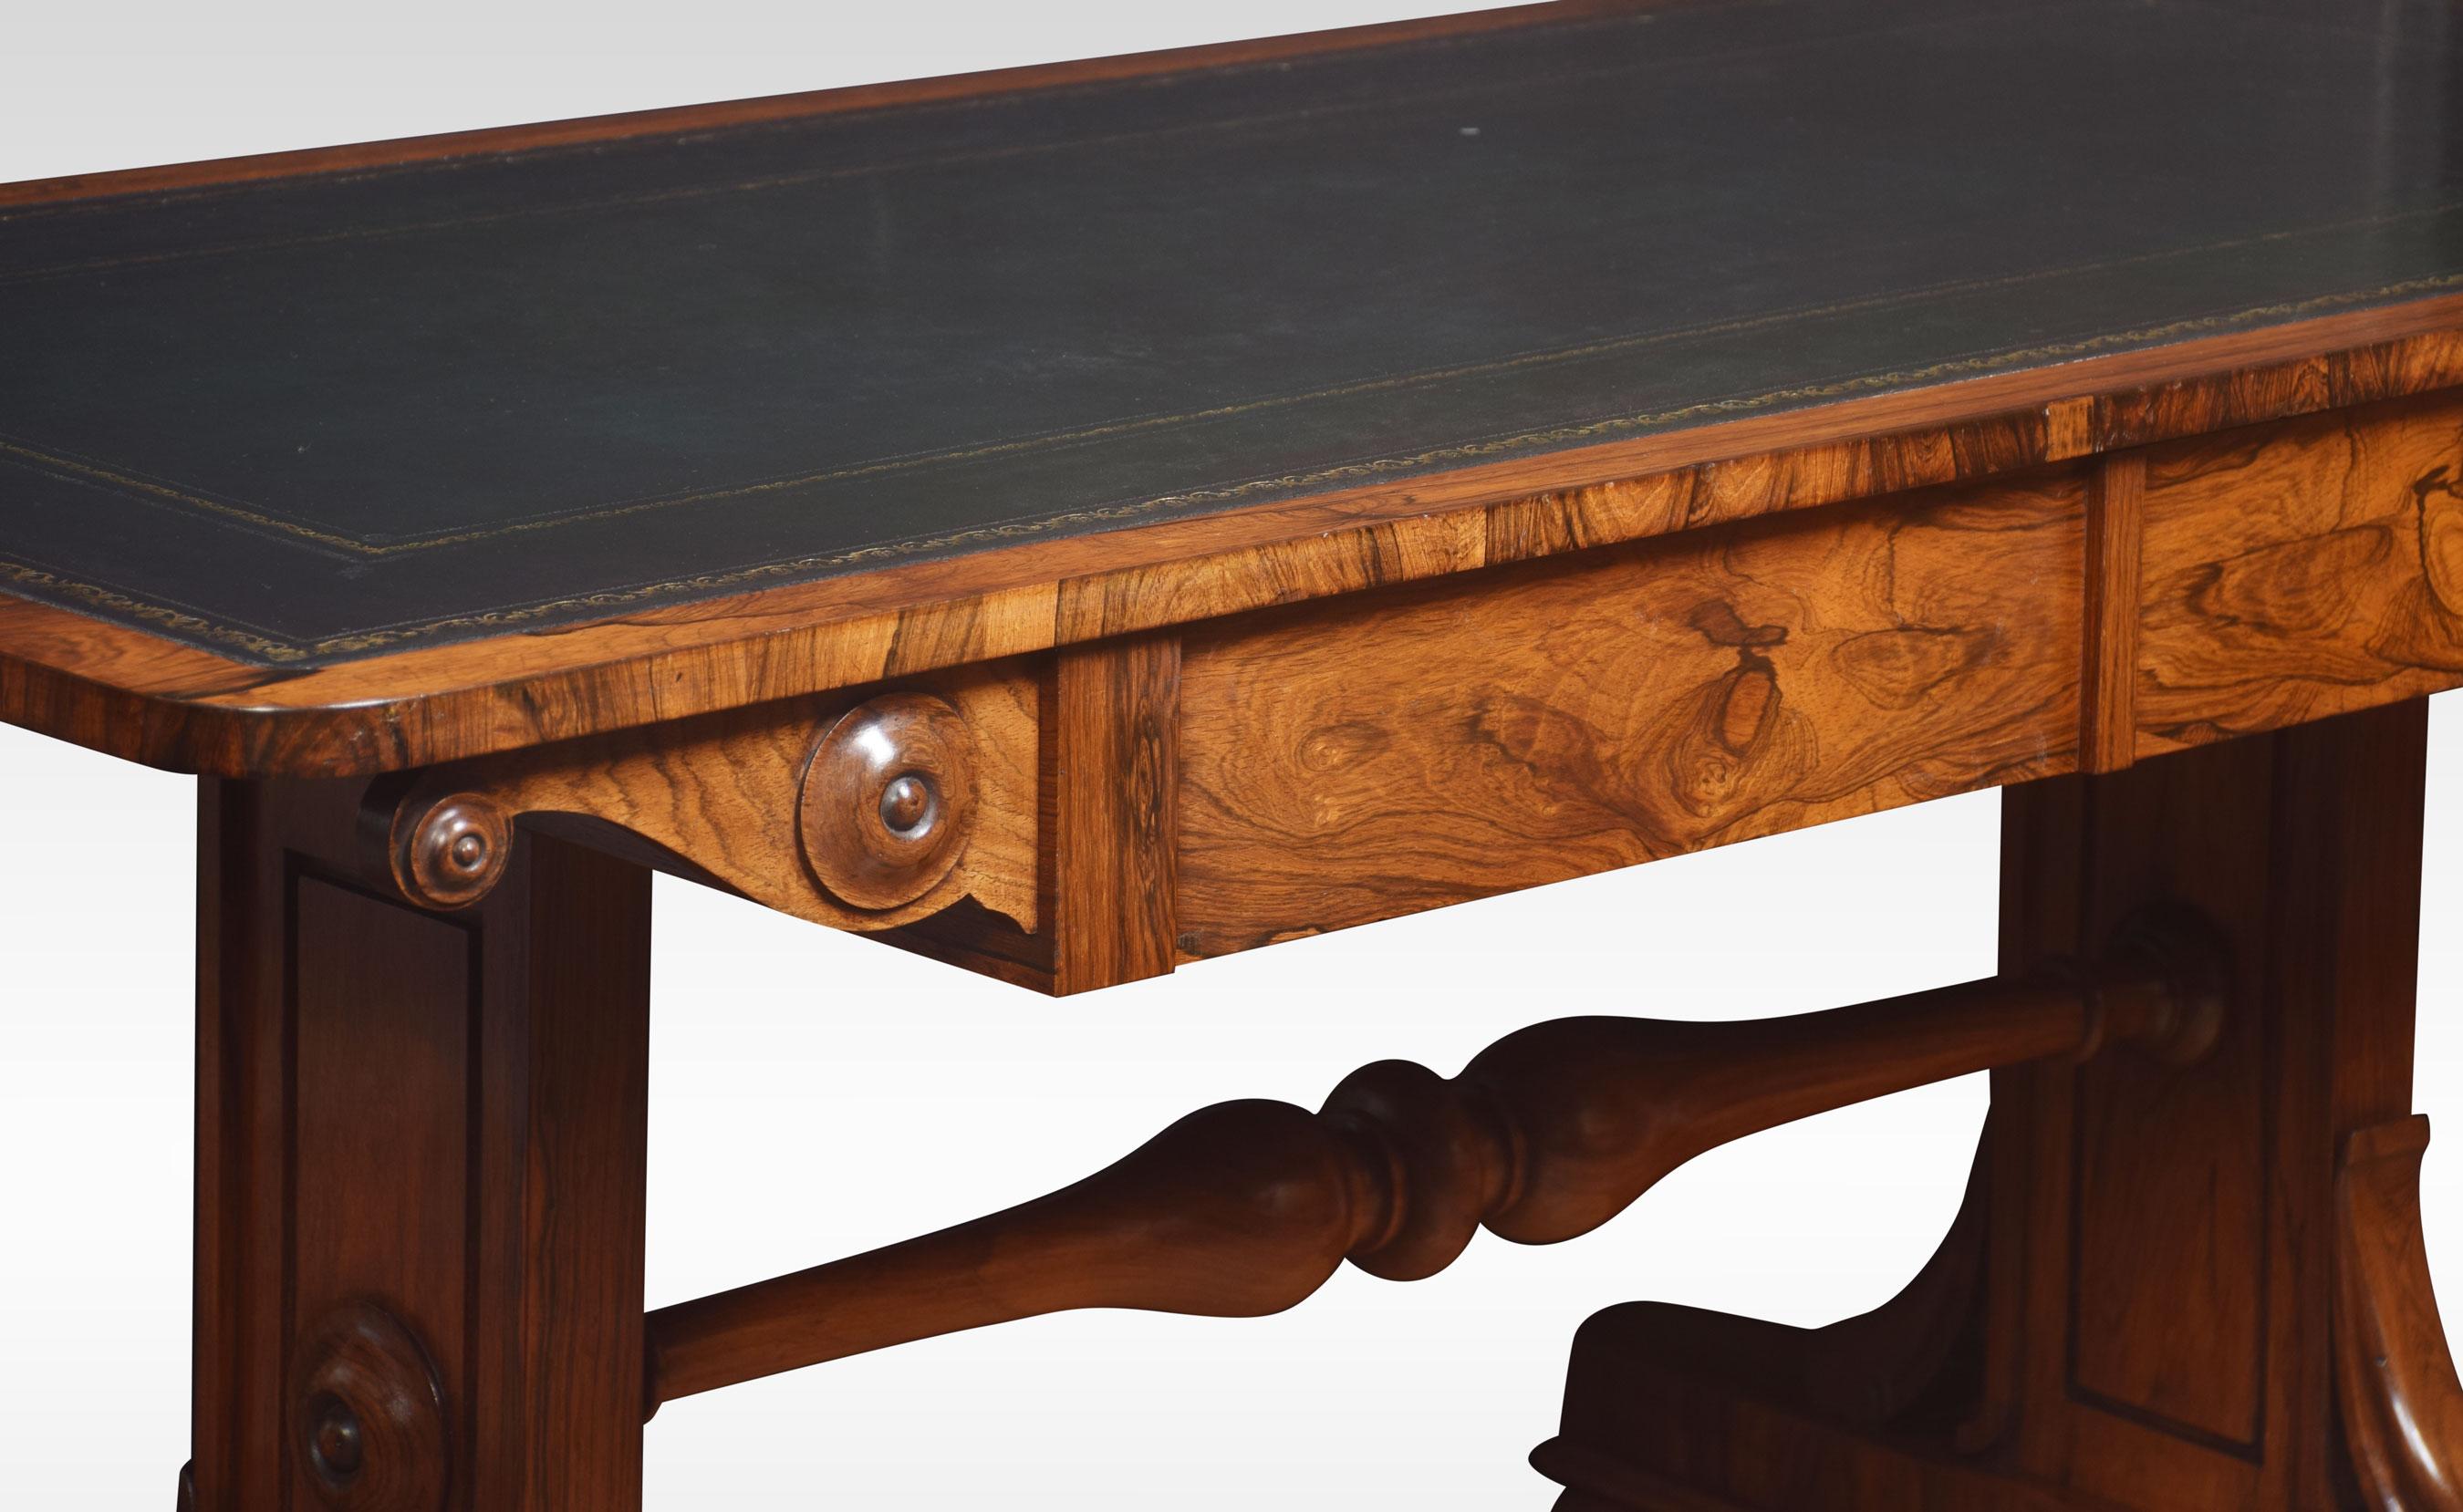 19th century rosewood library table, the large rectangular top with rounded corners having tooled inset leather writing surface. The freeze fitted with opposing drawers, supported on twin carved uprights, united by a turned stretcher. All raised up